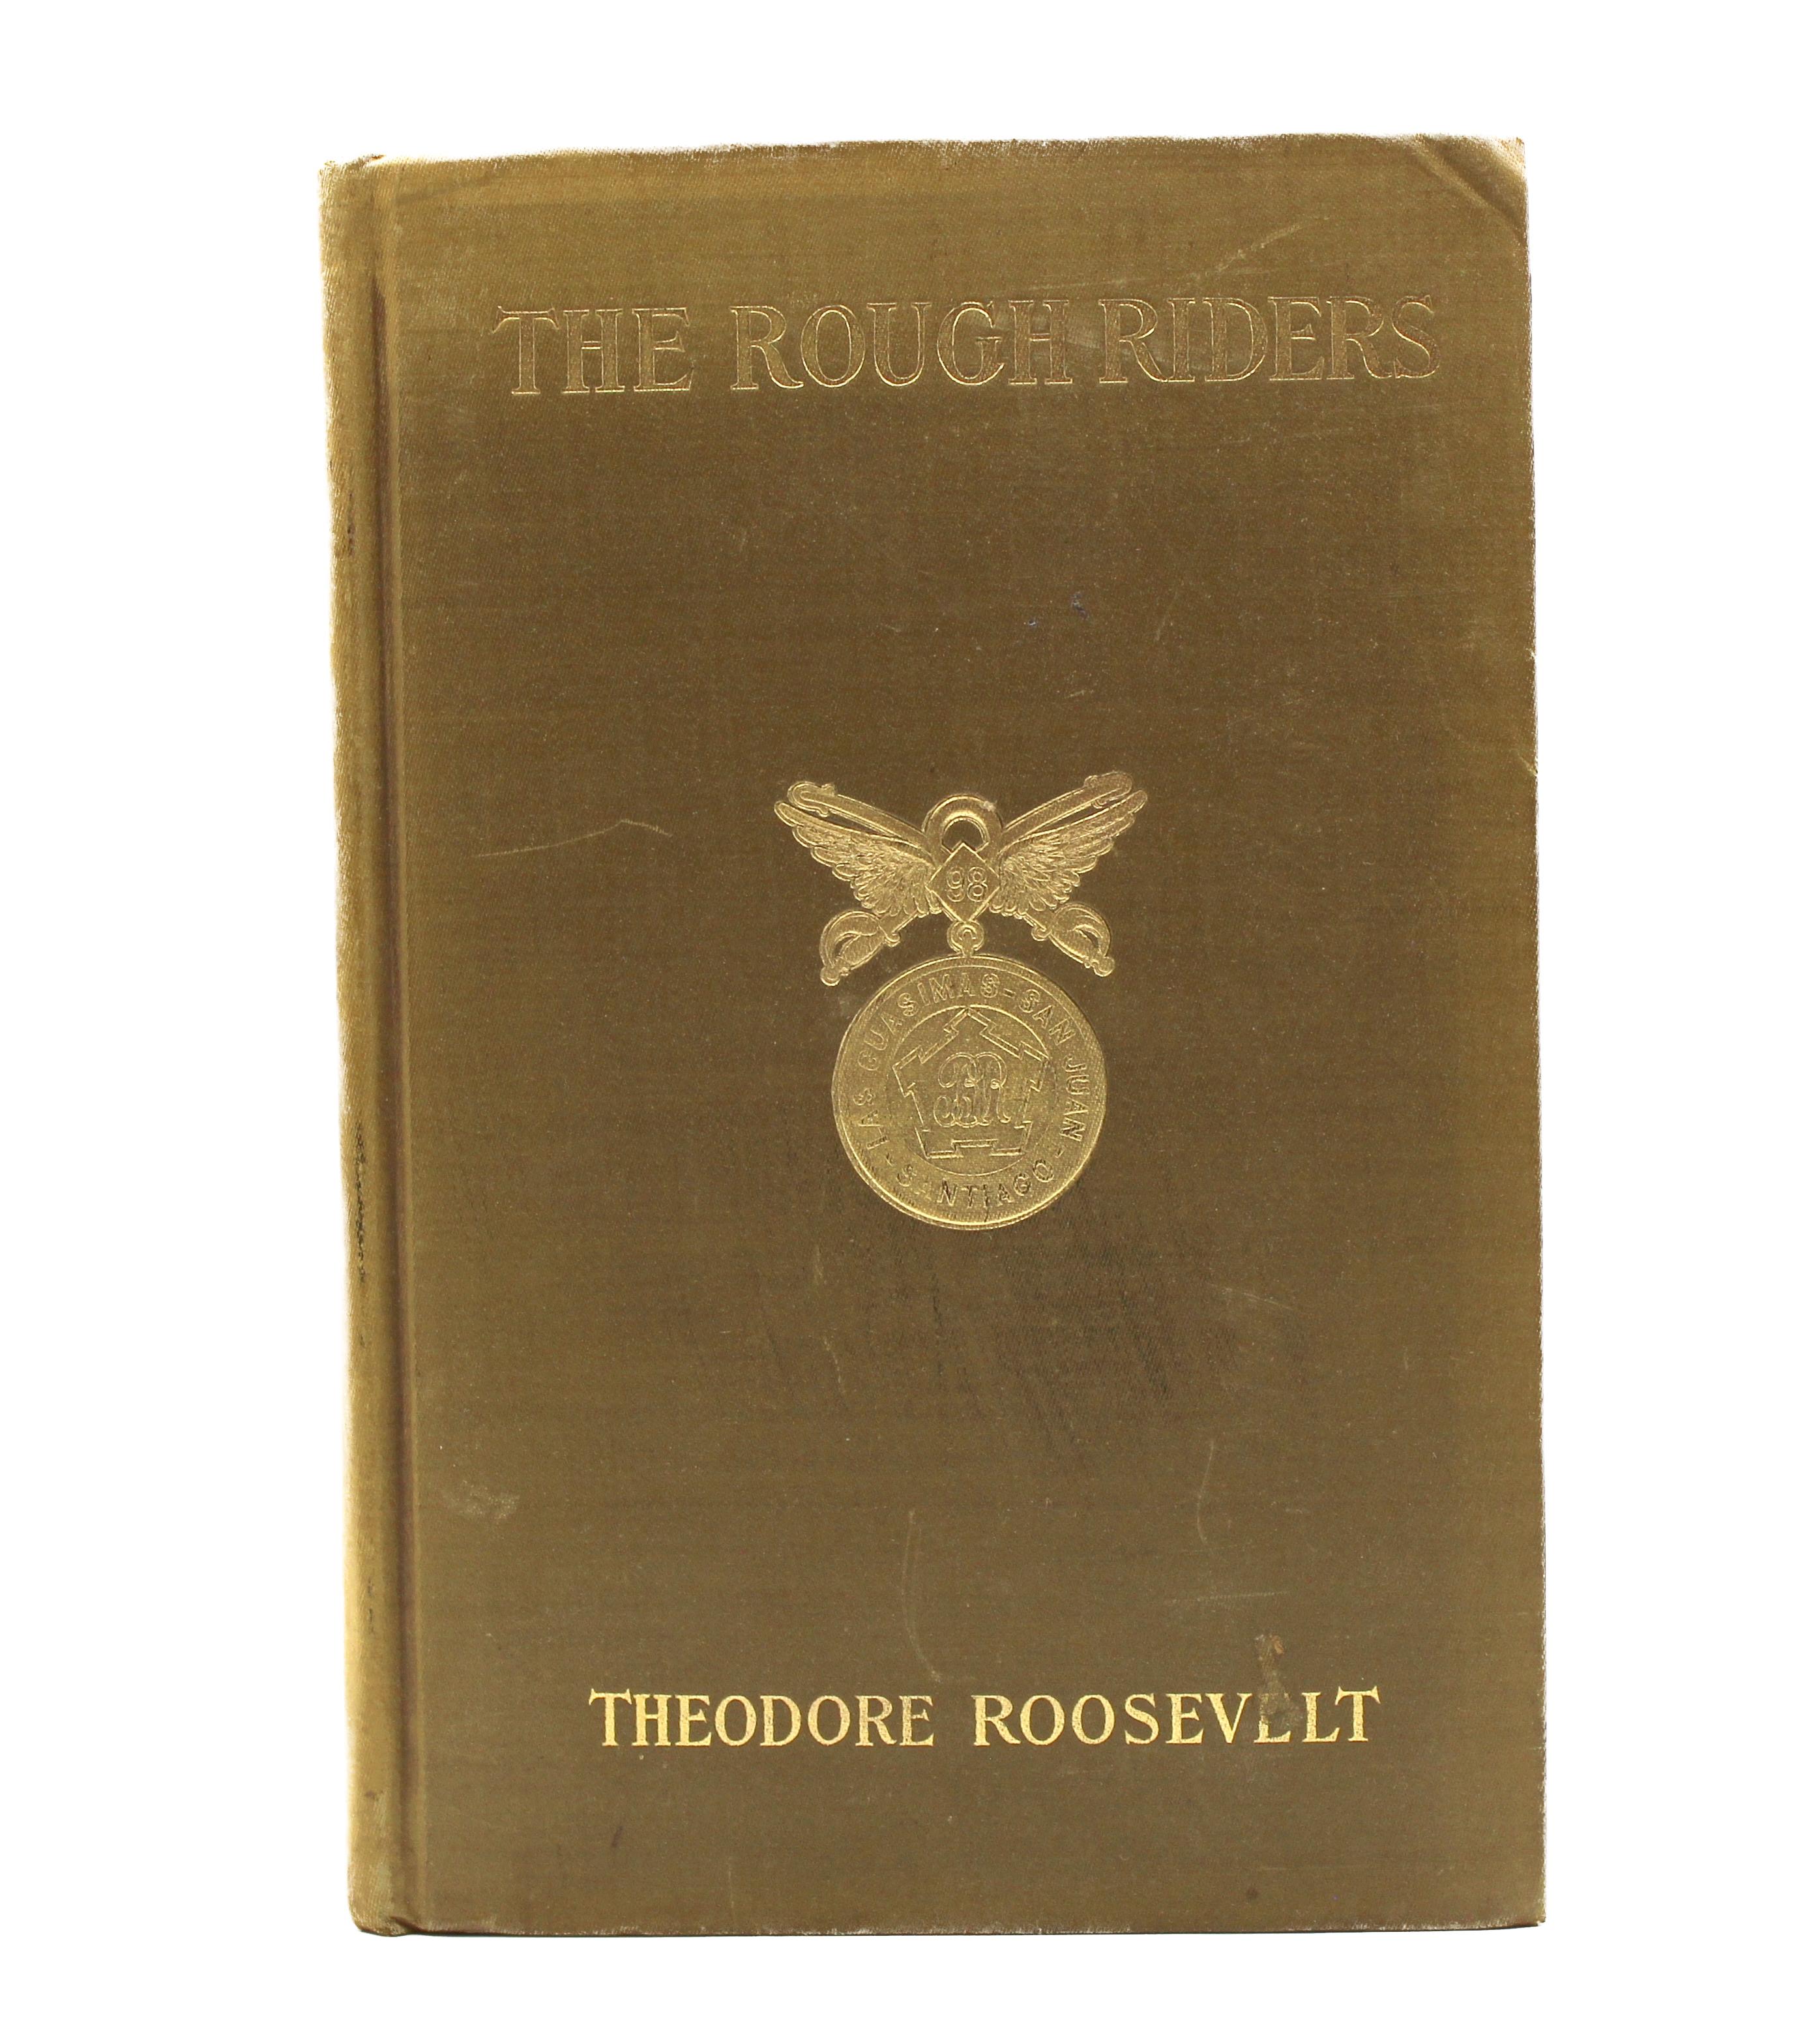 Gilt The Rough Riders by Theodore Roosevelt, First Edition, 1899